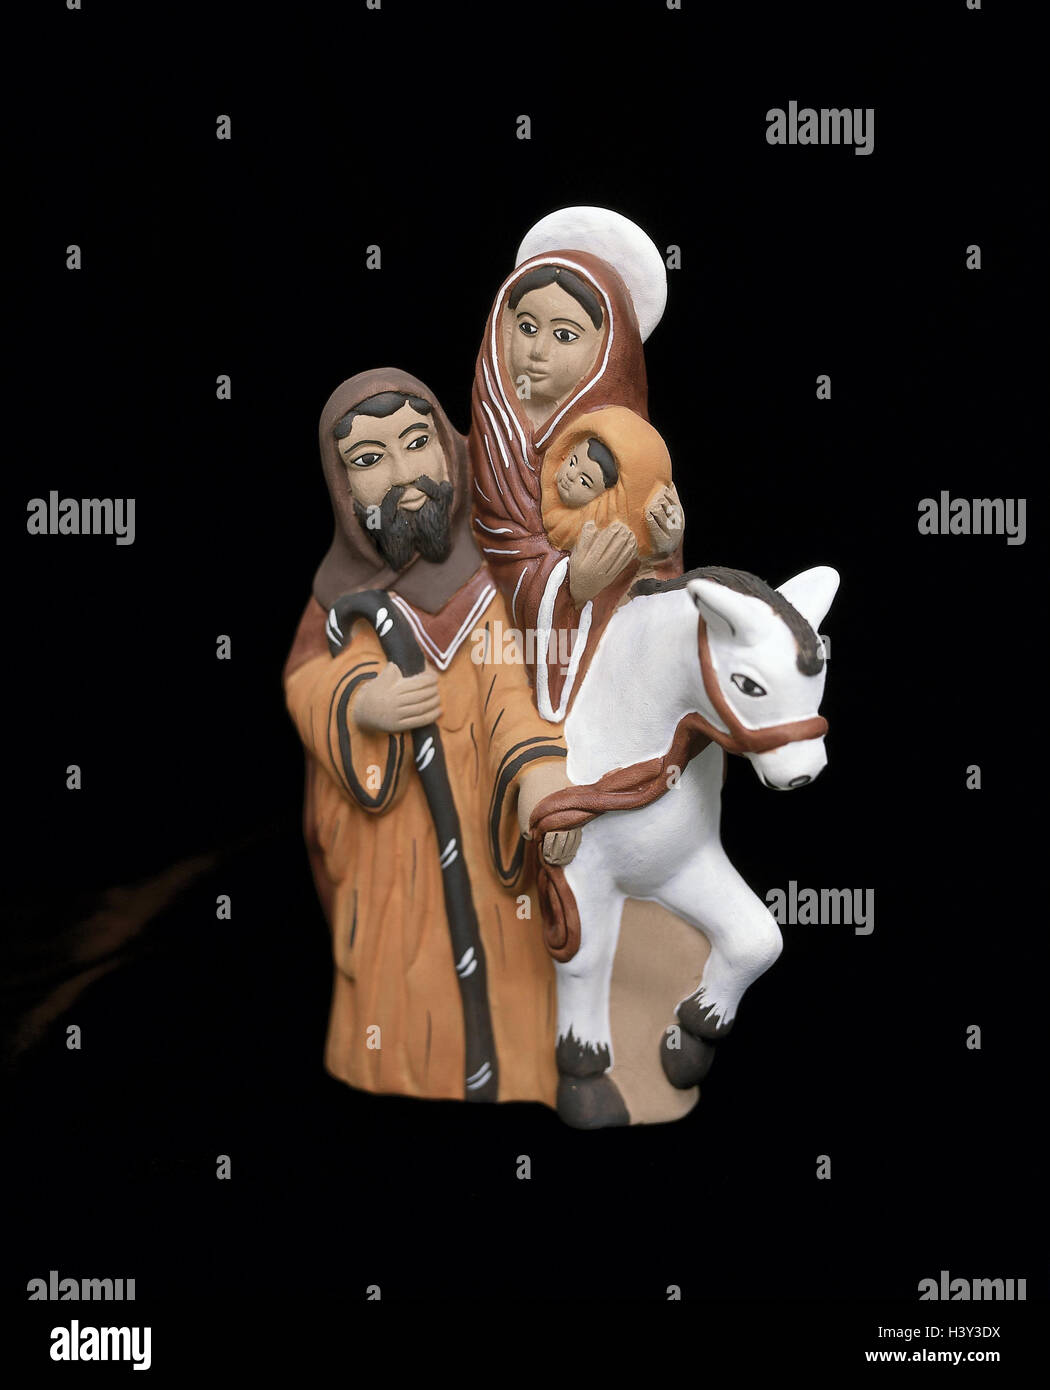 Mexico, nativity figurines, holy family, donkey, clay, Mexico, Christmas, creche, manger, traditions, religion, Jesus's child, figures, tone figures, product photography, Still life Stock Photo